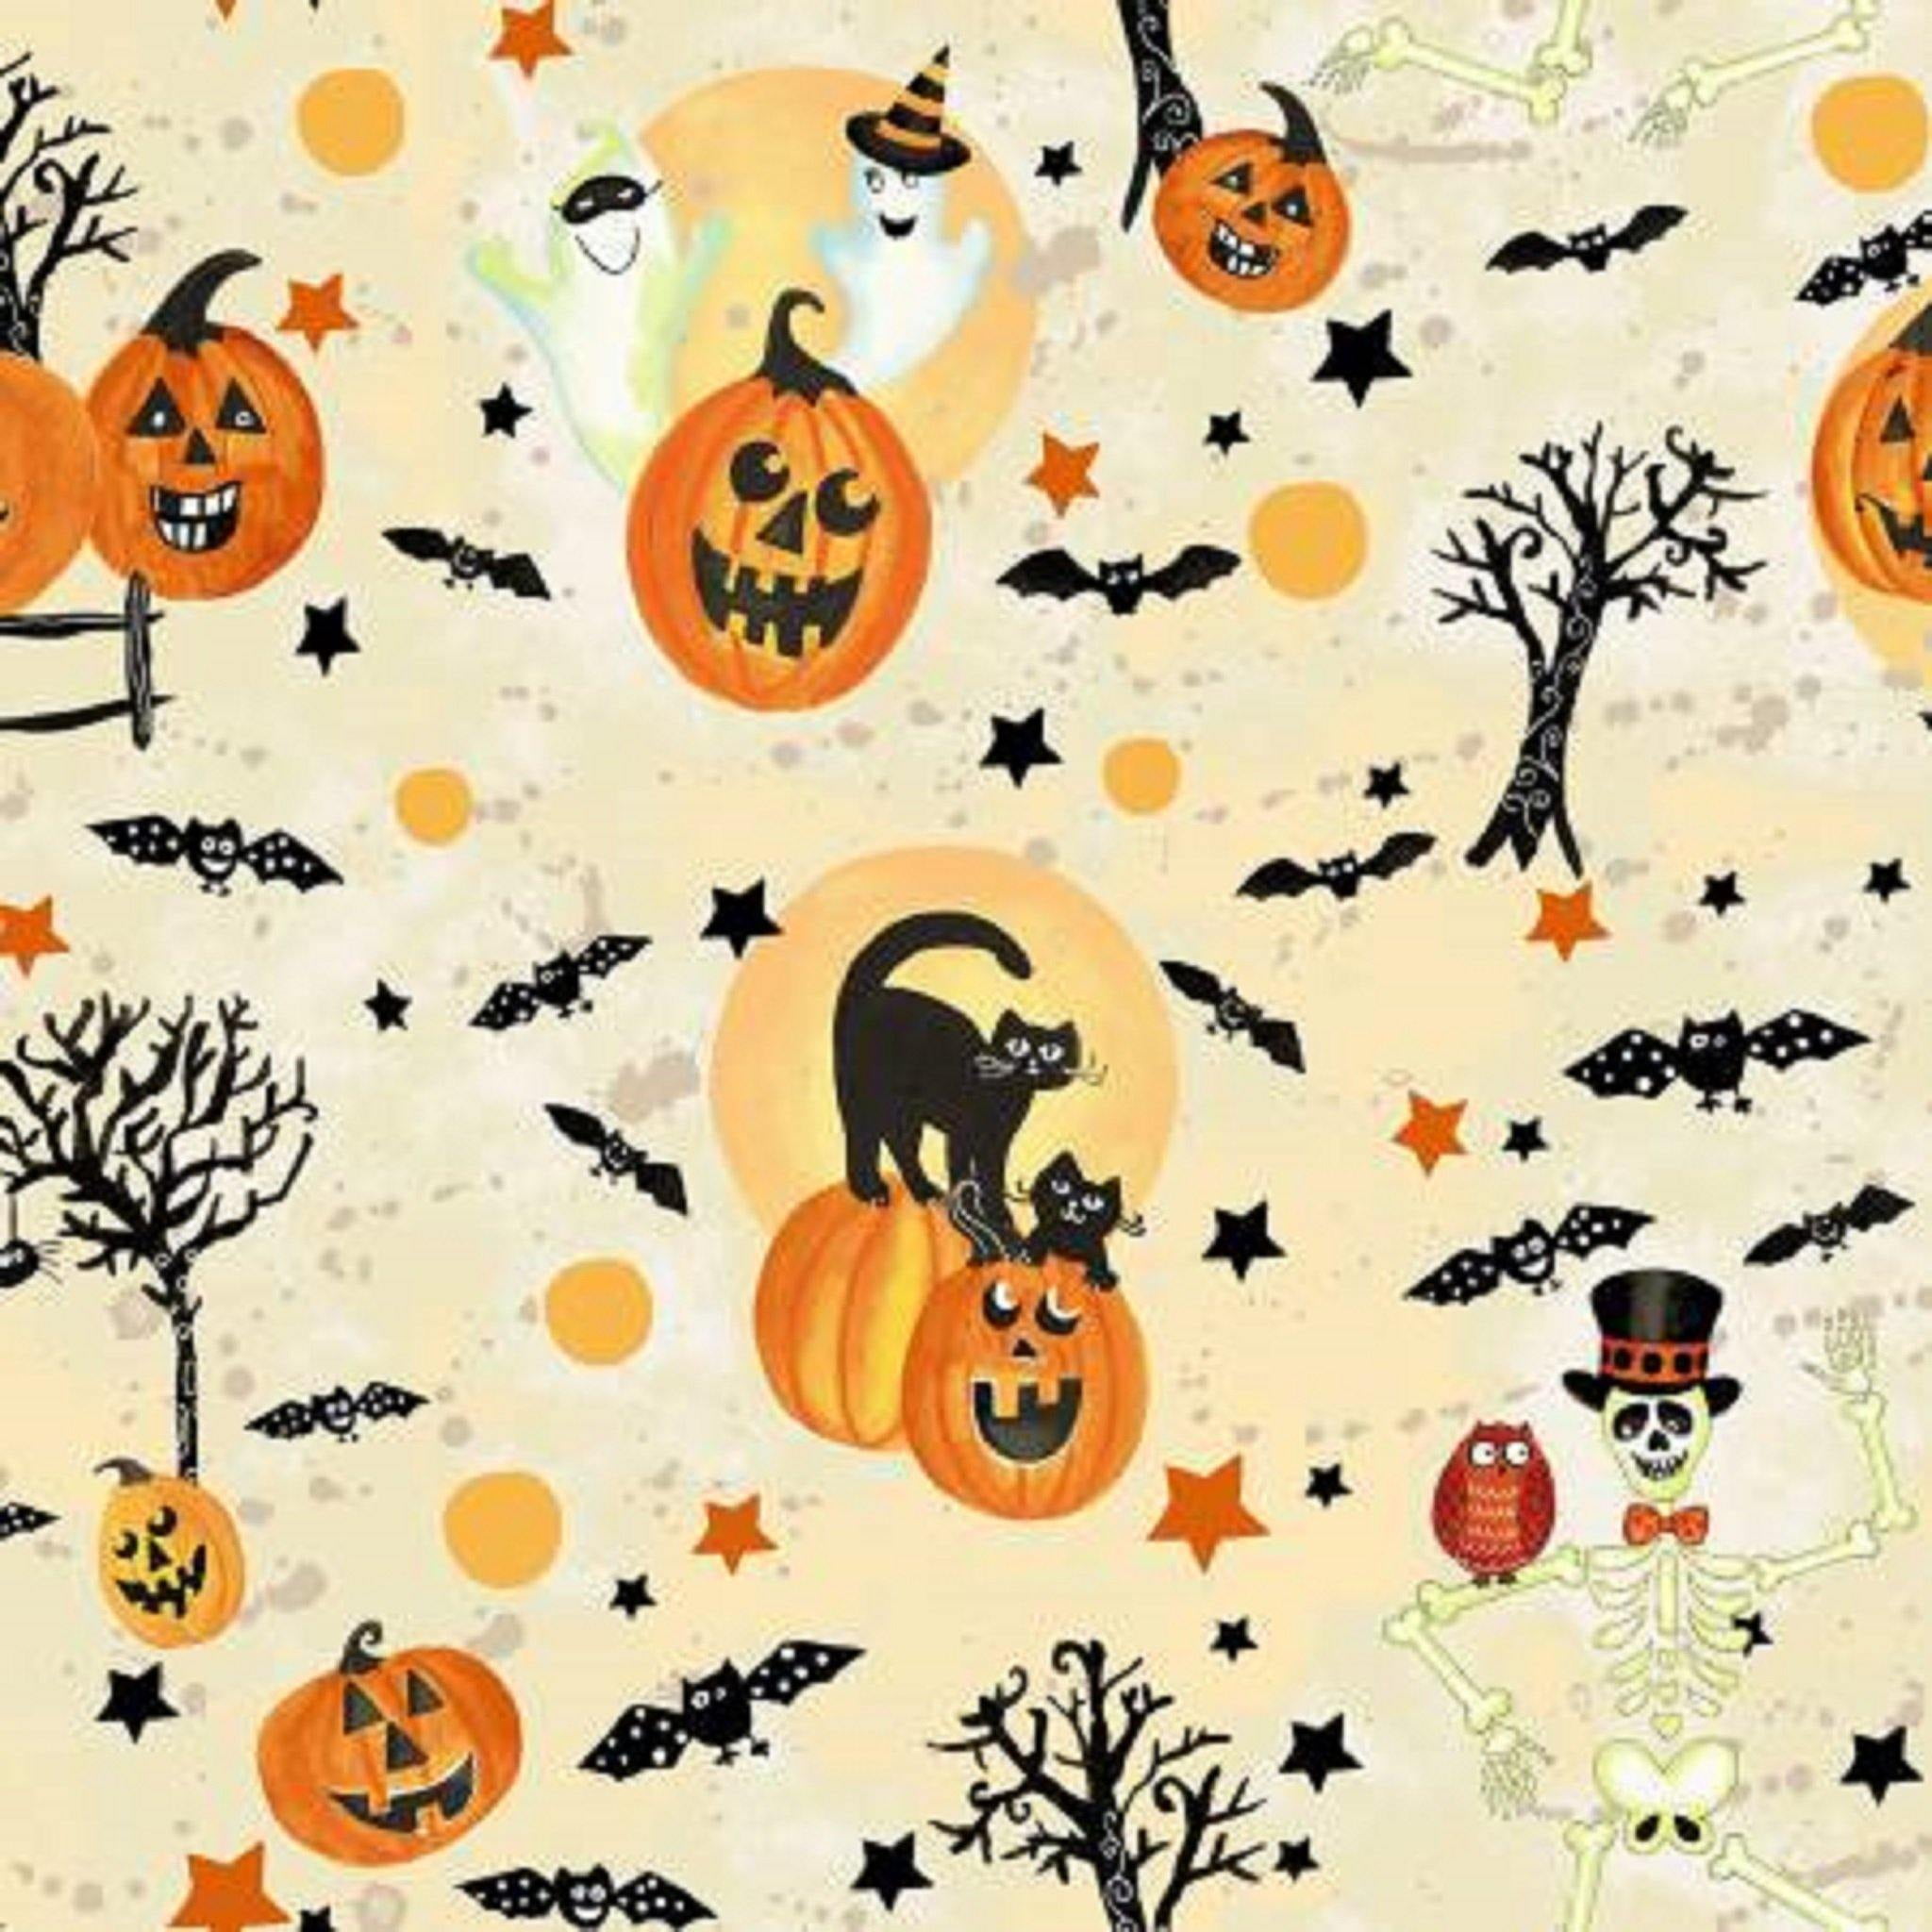 Halloween Owl Pumpkin Toss Fabric 100% Cotton By The Yard Trick Or Treat Royal 